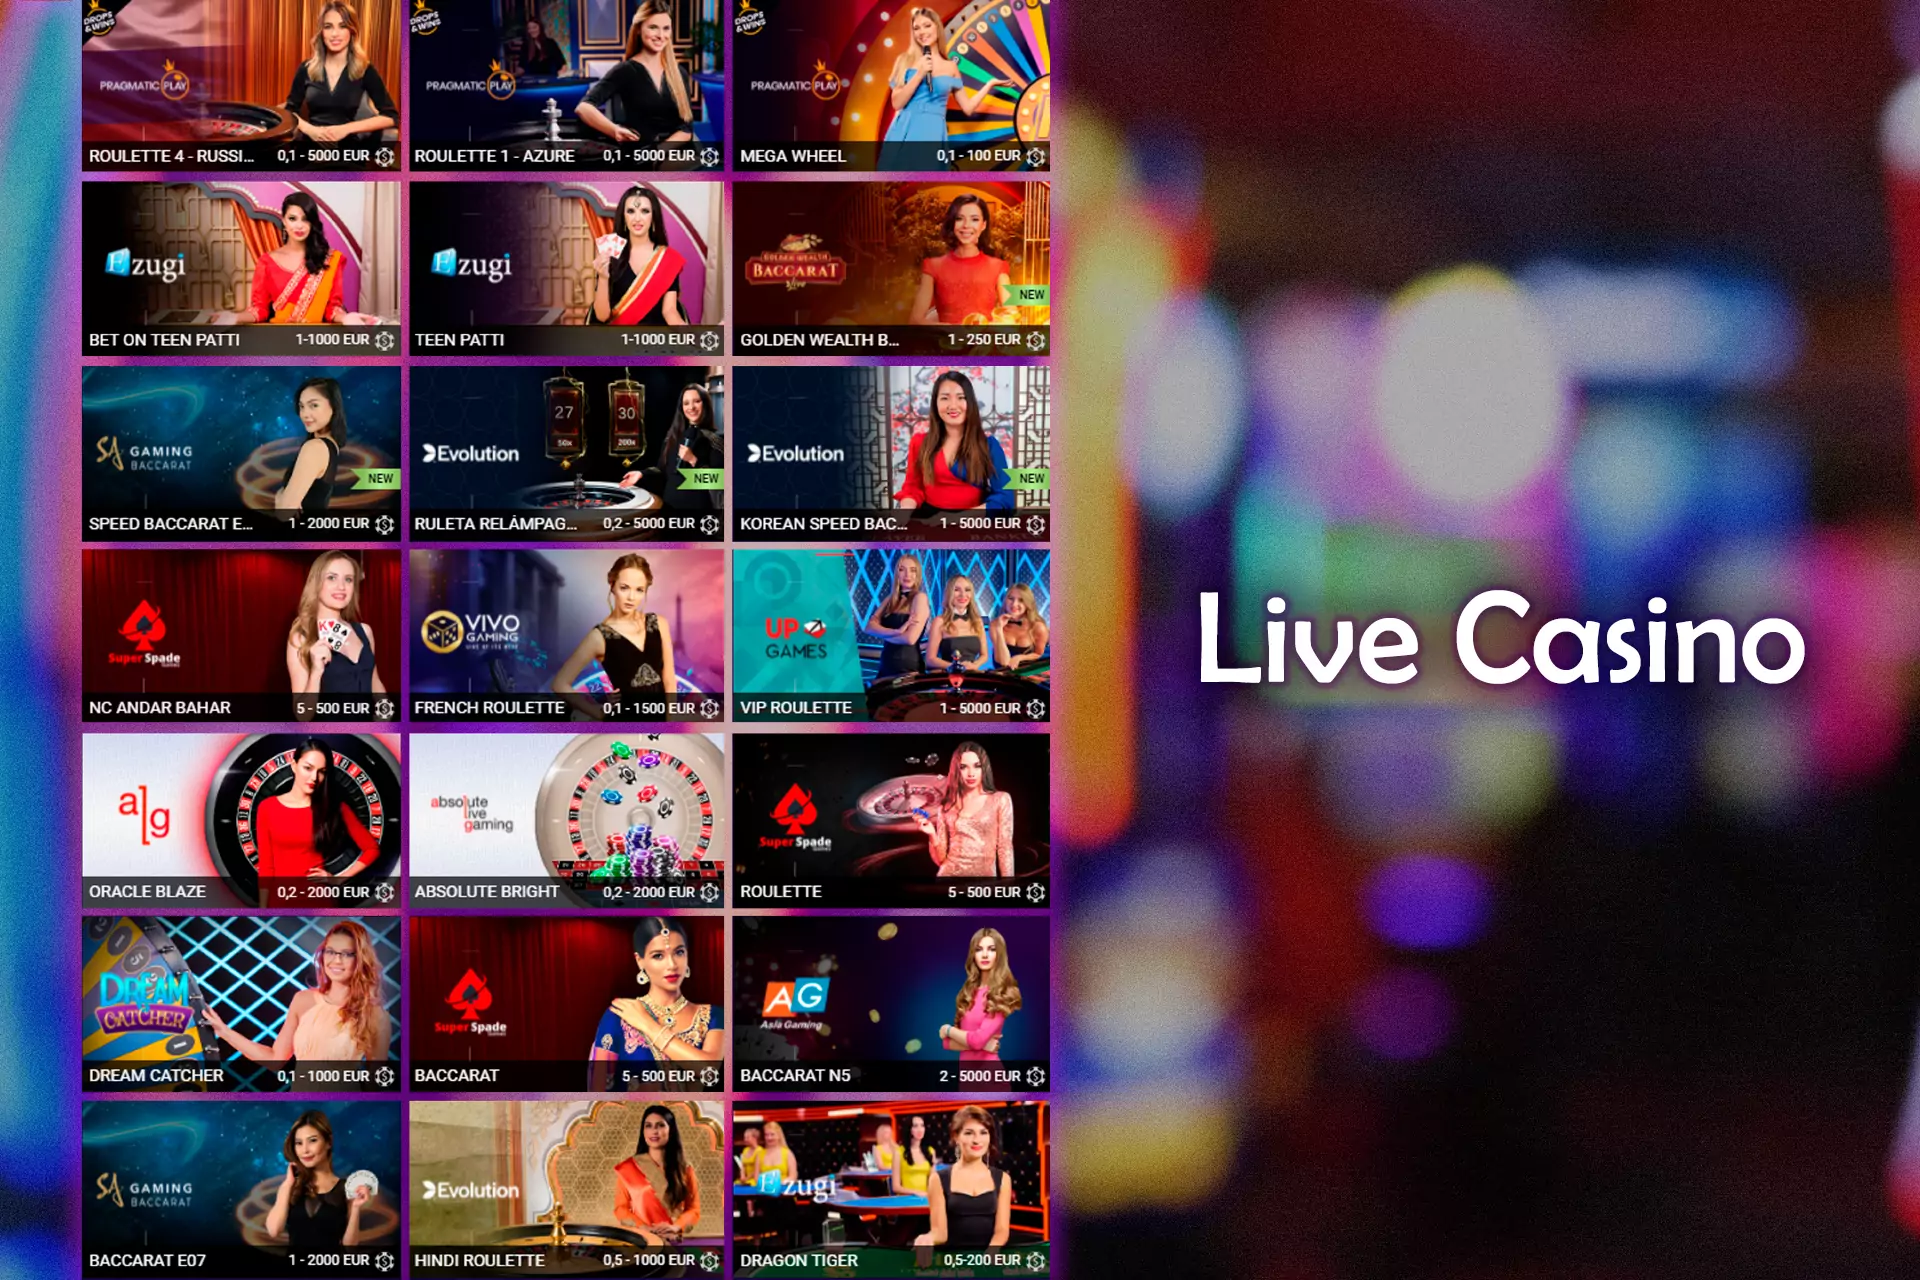 In the Live Casino, you can play with a live dealer.